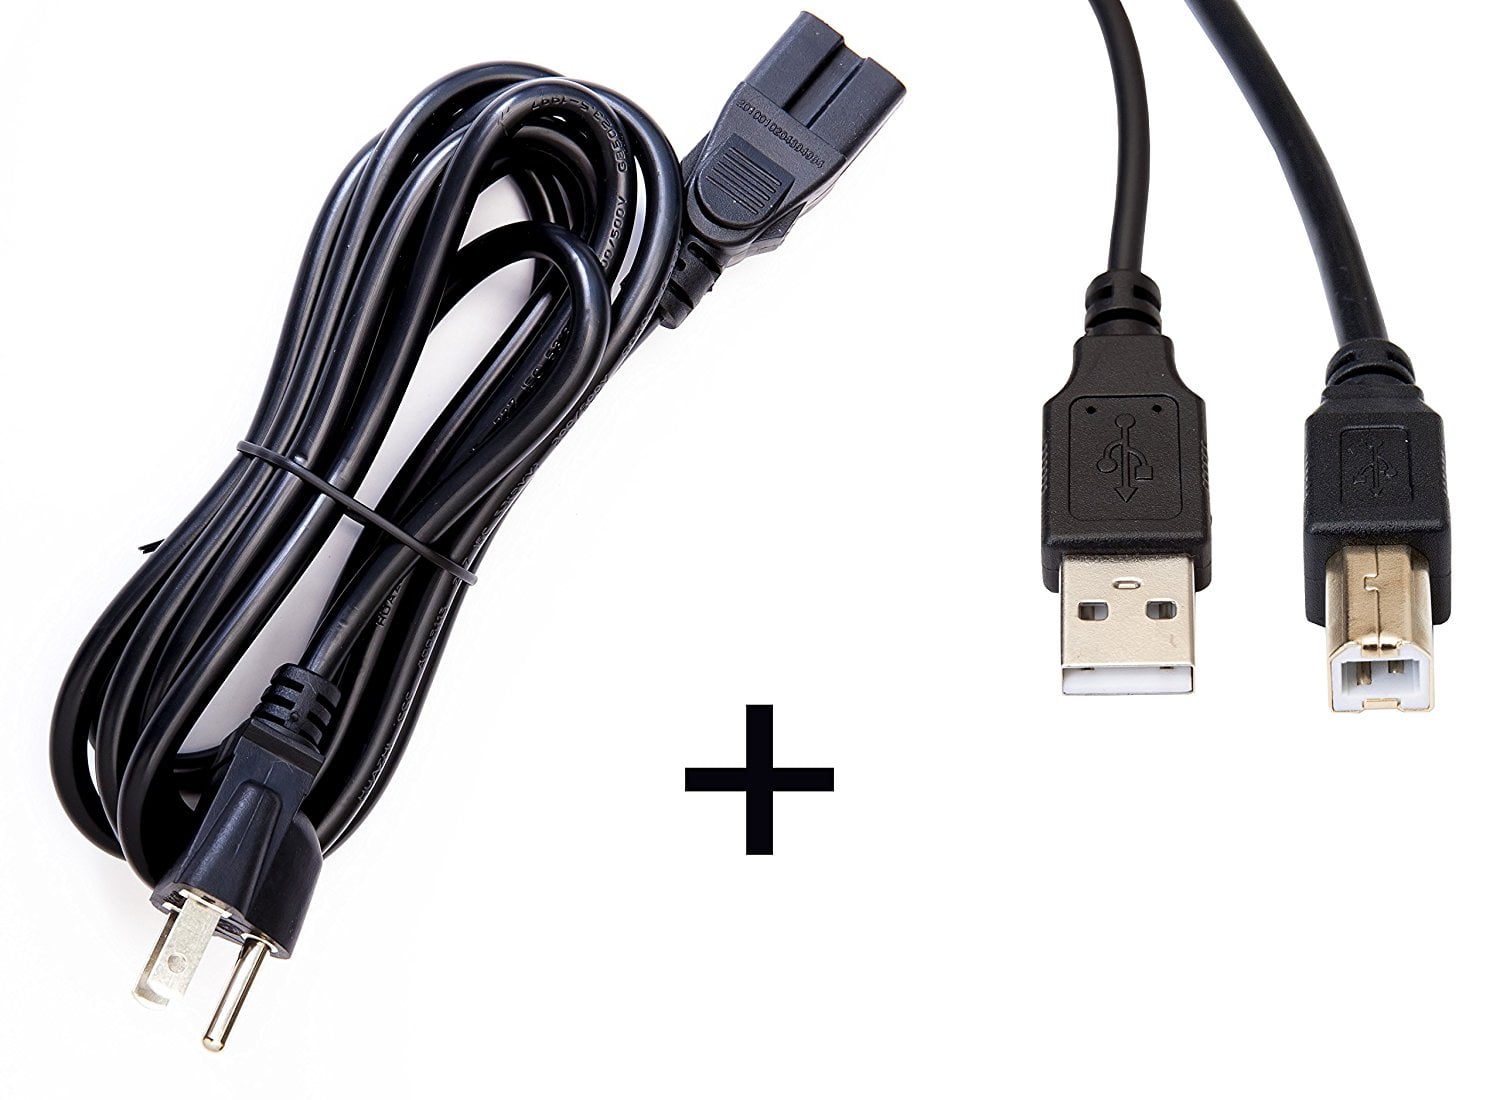 AC Power Cord For Pioneer DJM-500 4-Channel Pro Dj Mixer Outlet Plug Cable NEW 